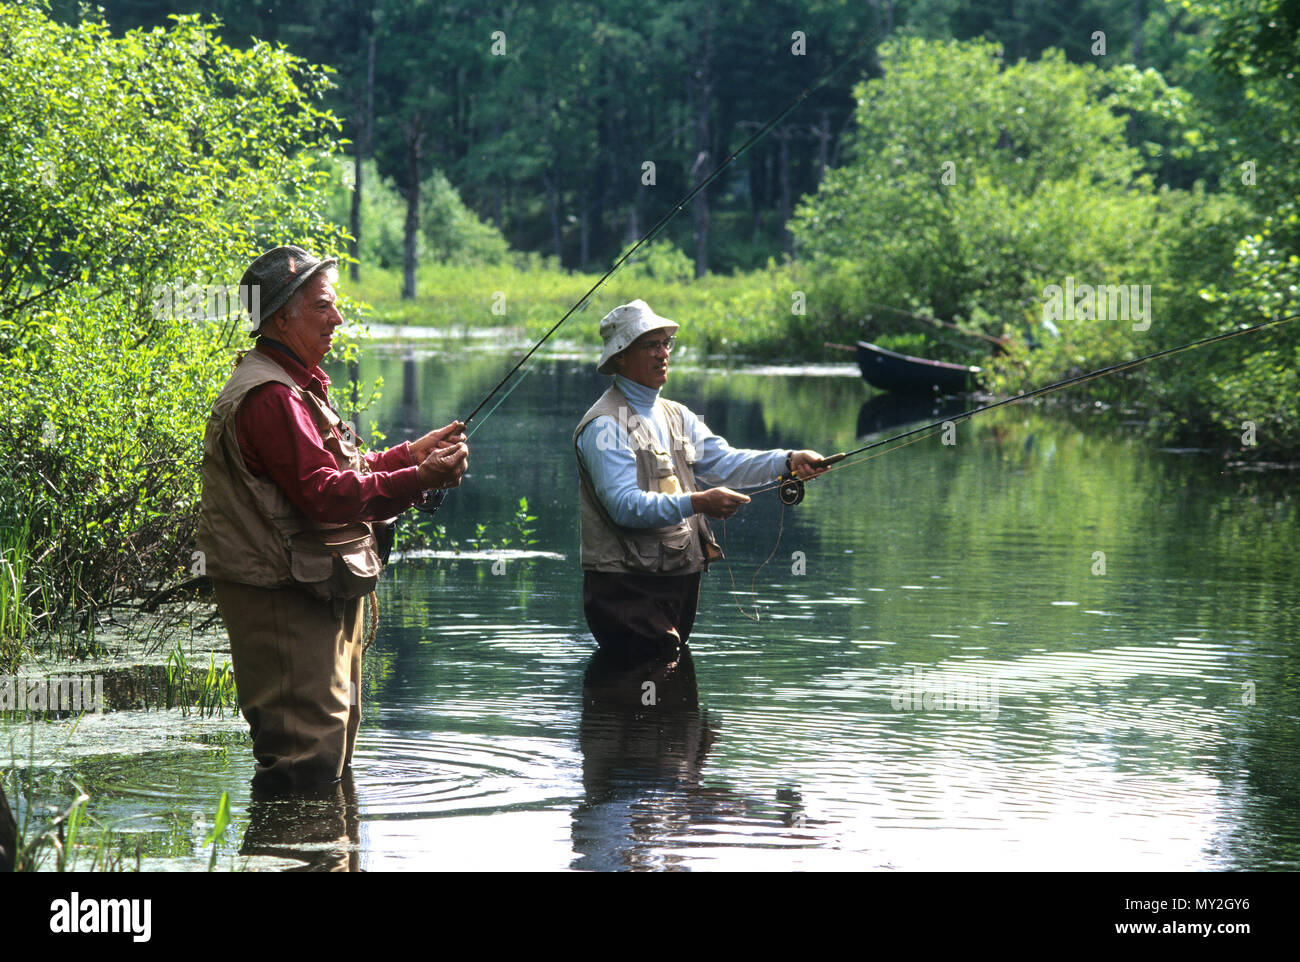 Fly fishing along the Blacstone River in Massachusetts, USA Stock Photo